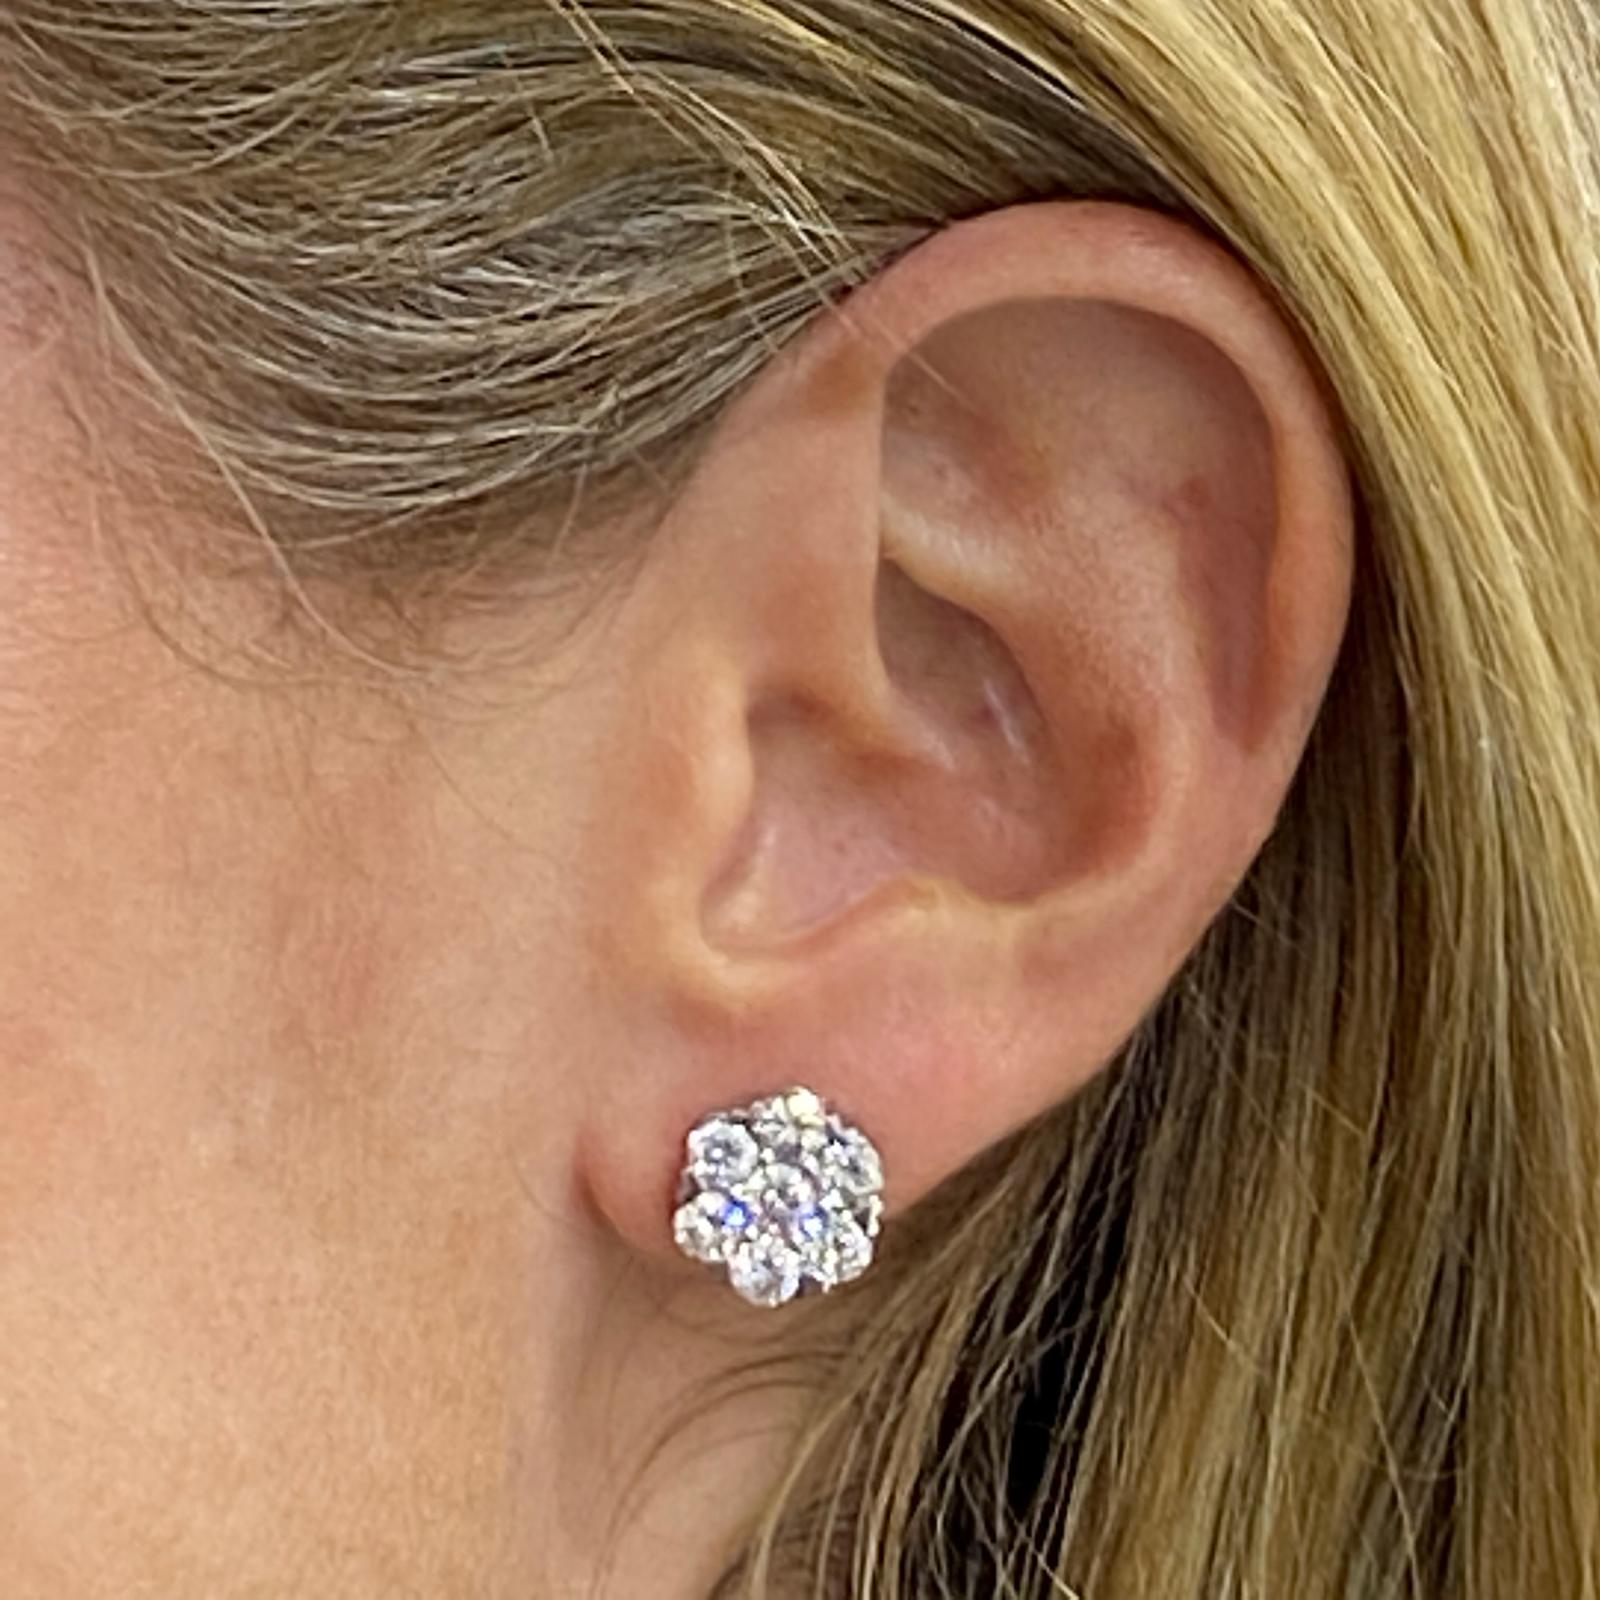 Diamond flourette stud earrings fashioned in 18 karat white gold. The studs feature 14 round brilliant cut diamonds weighing approximately 3.00 carat total weight. The diamonds are graded G color and VS-SI1 clarity. Measure: 11.5 mm in diameter. 